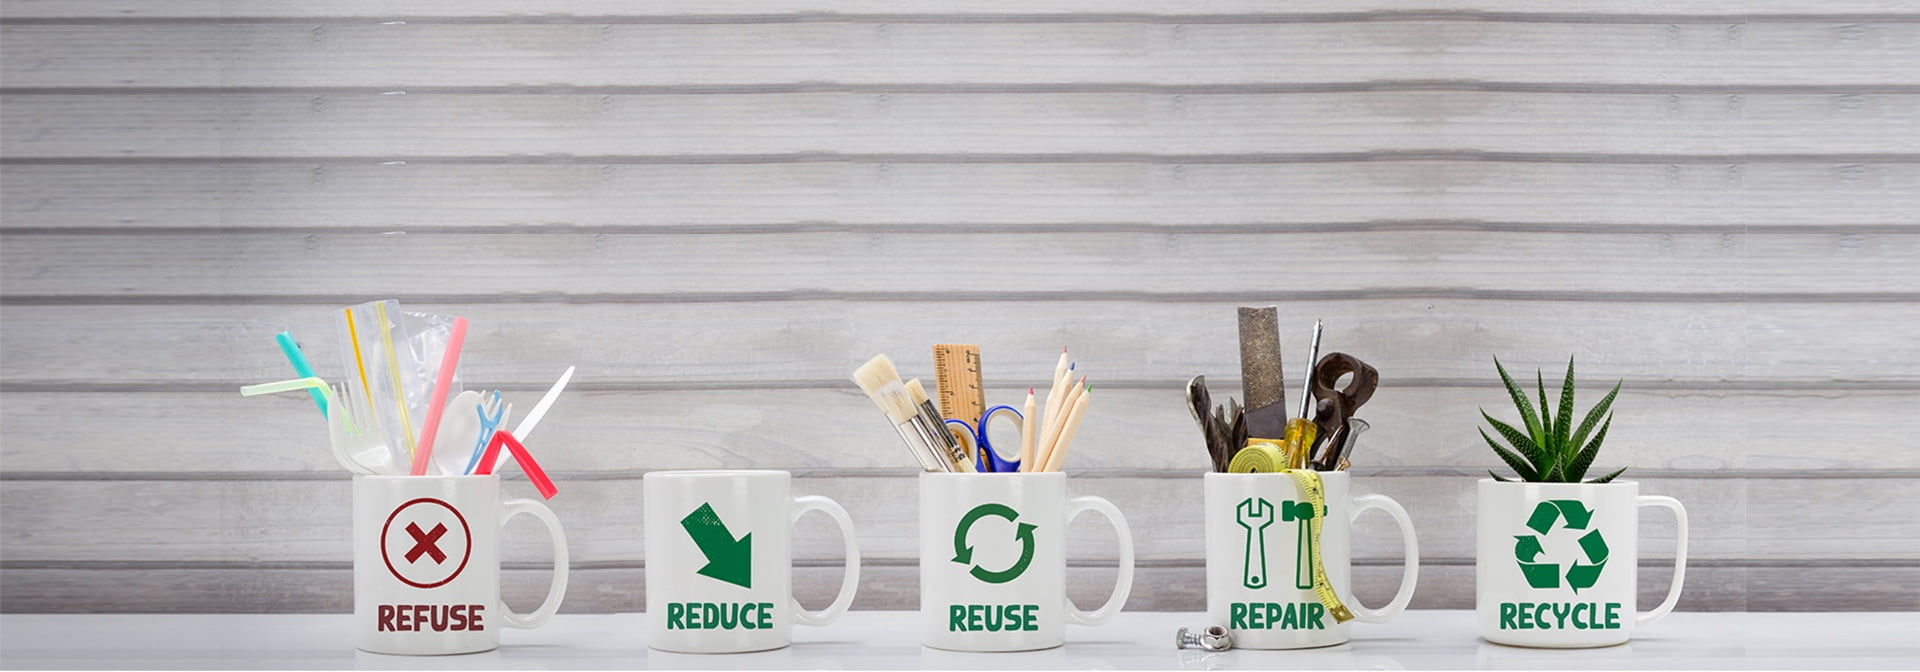 <h1 class="inner"><h1 class="banner-left-center" id="remove-text-shadow" style="color: #325c1d;">7 simple ways of waste management at home</h1></h1>